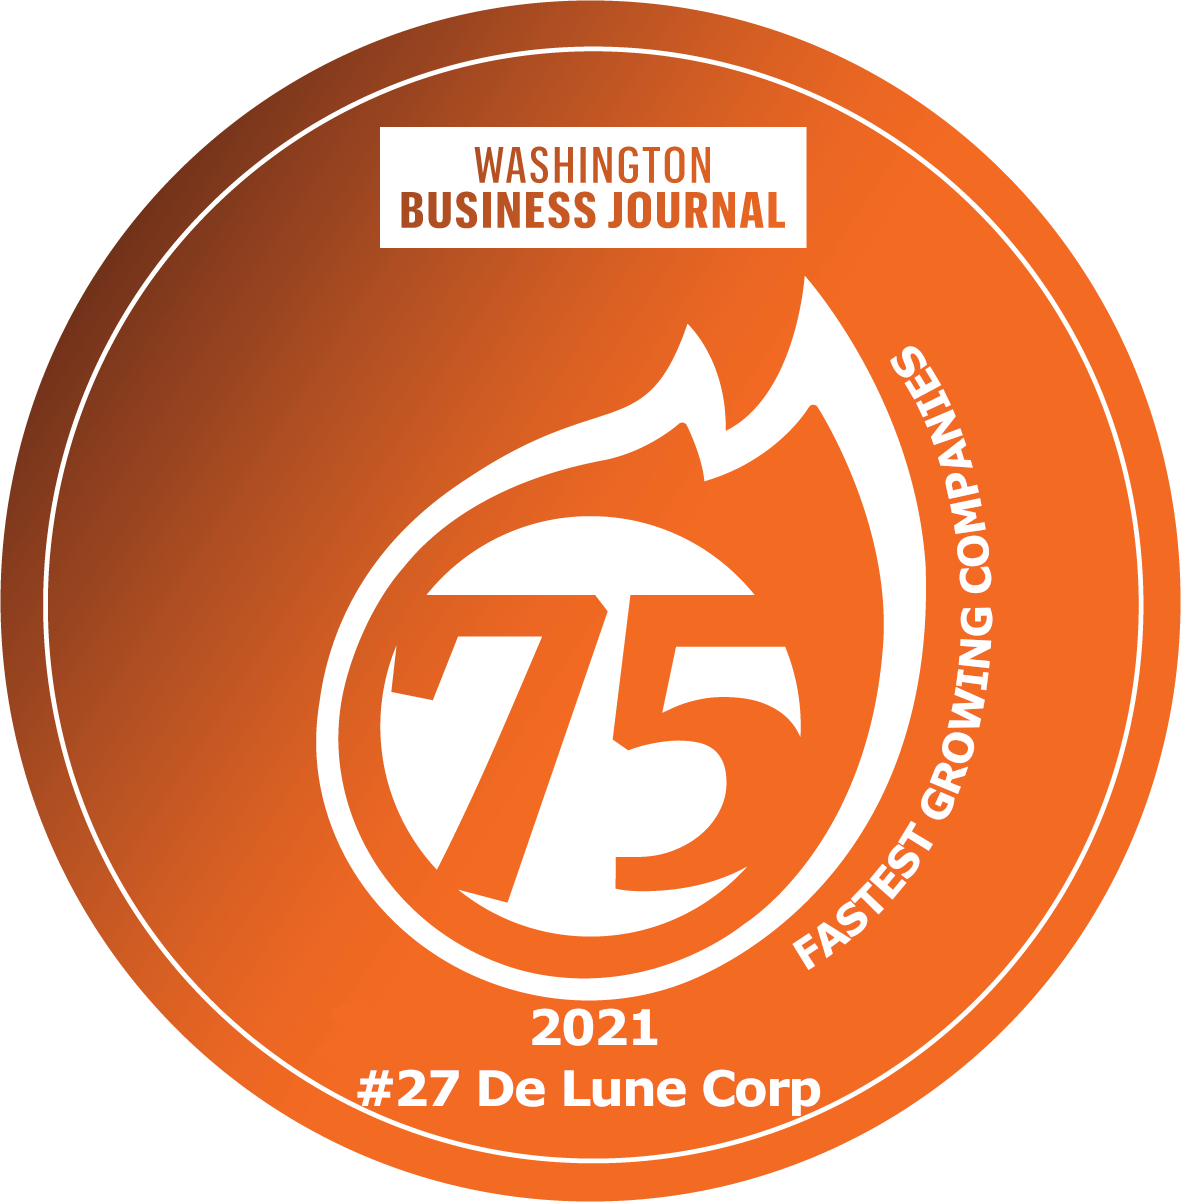  Washington Business Journal's annual list of America’s Fastest-Growing Private Companies1